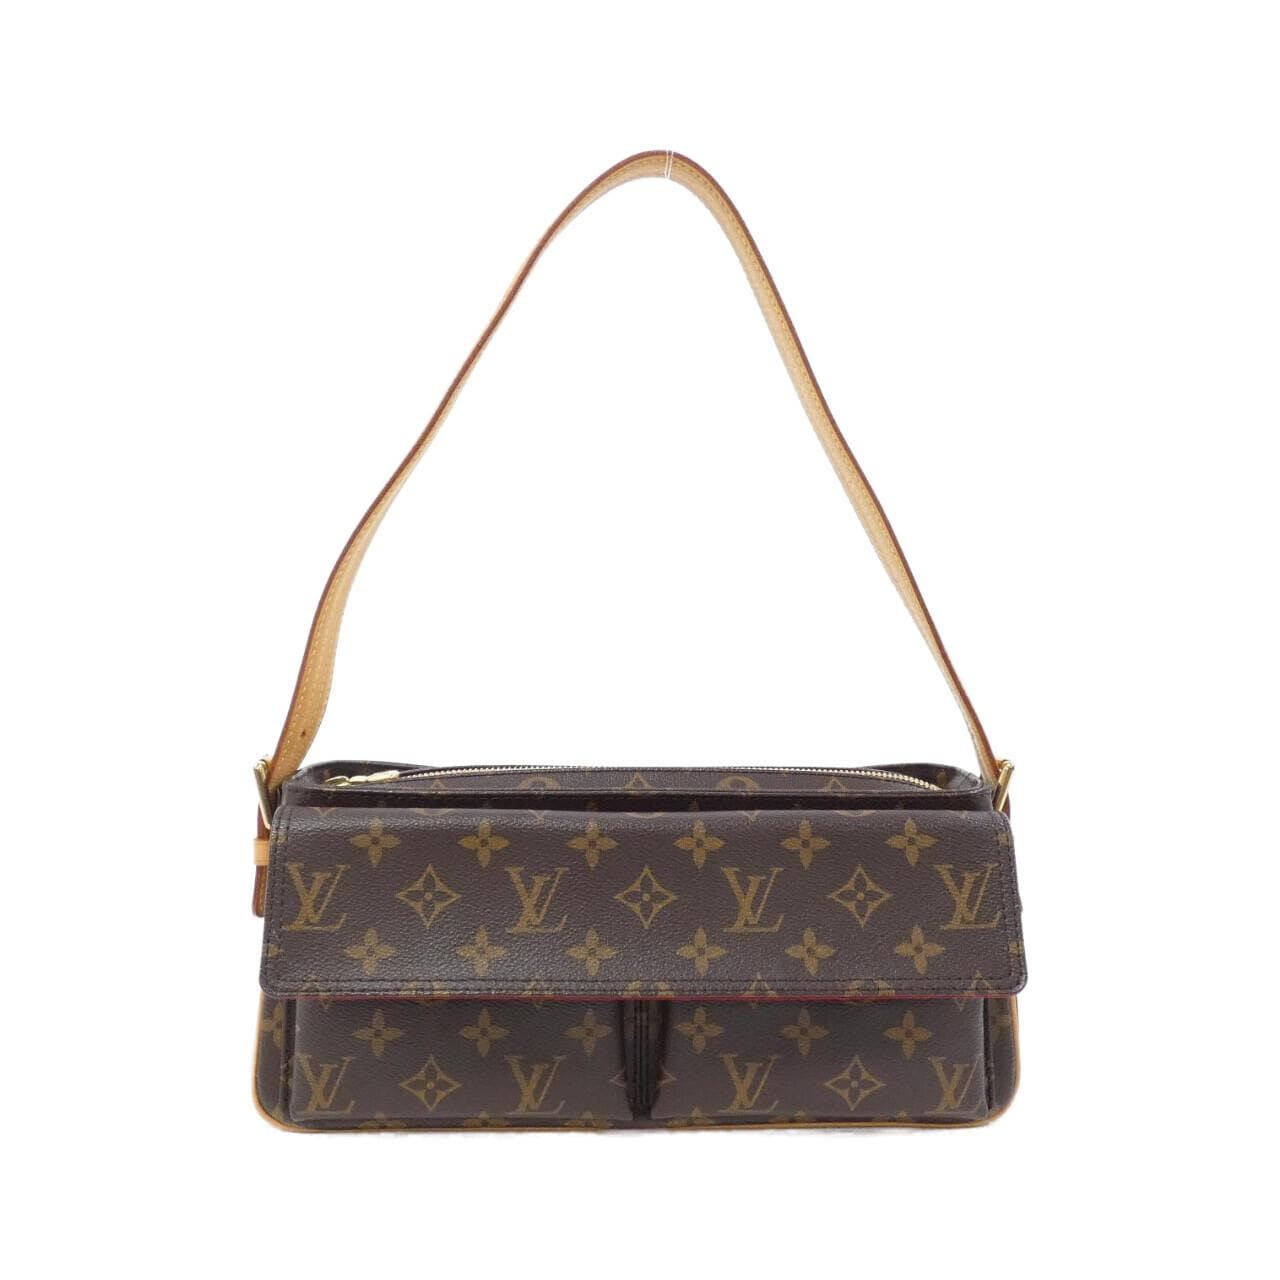 This beauty is our Louis Vuitton, Viva, Cite bag! great conditioning